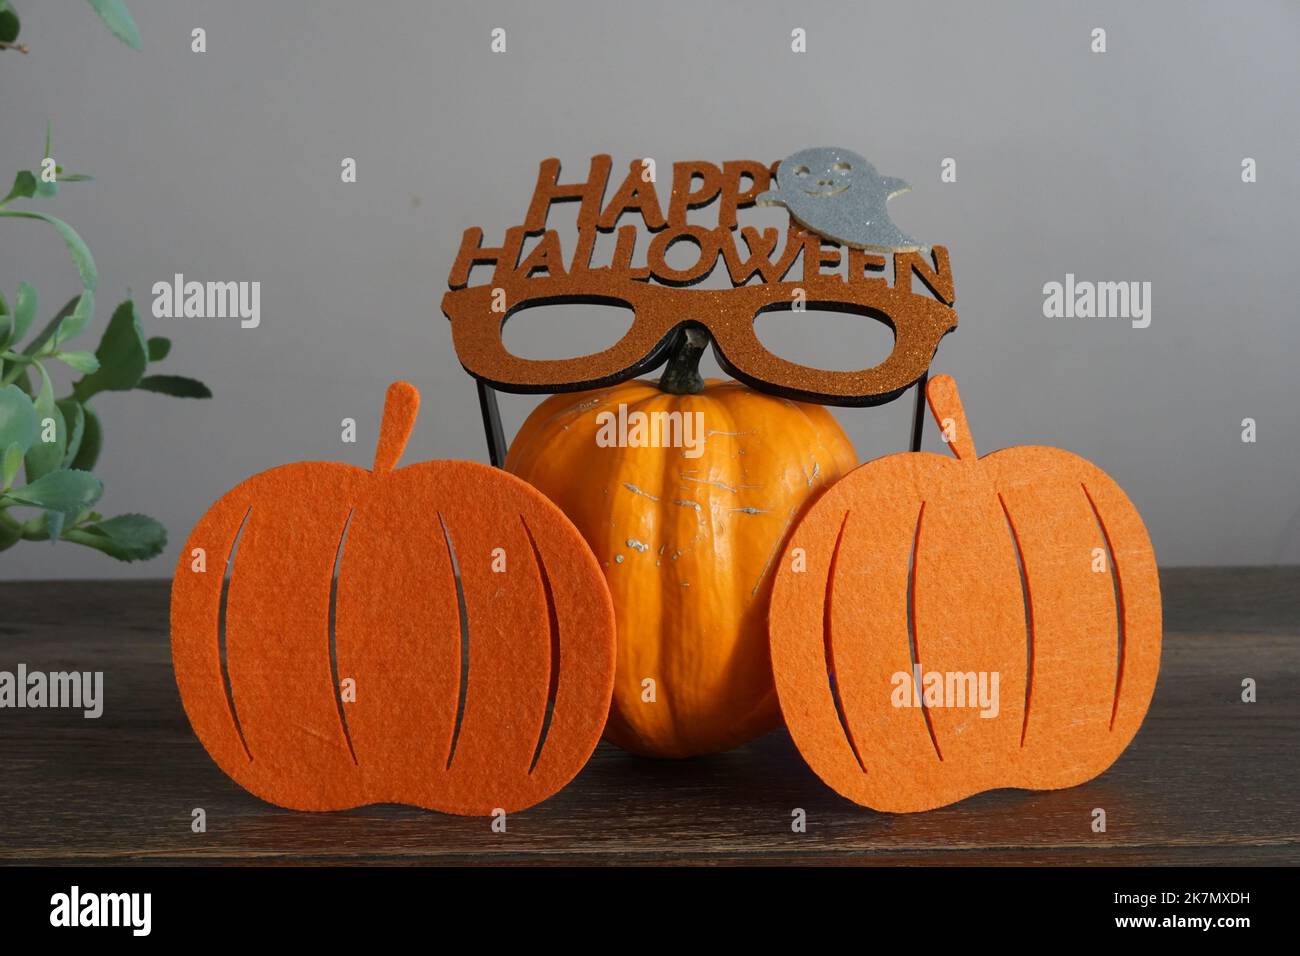 halloween concept with glasses, pumpkin, cones and candles Stock Photo